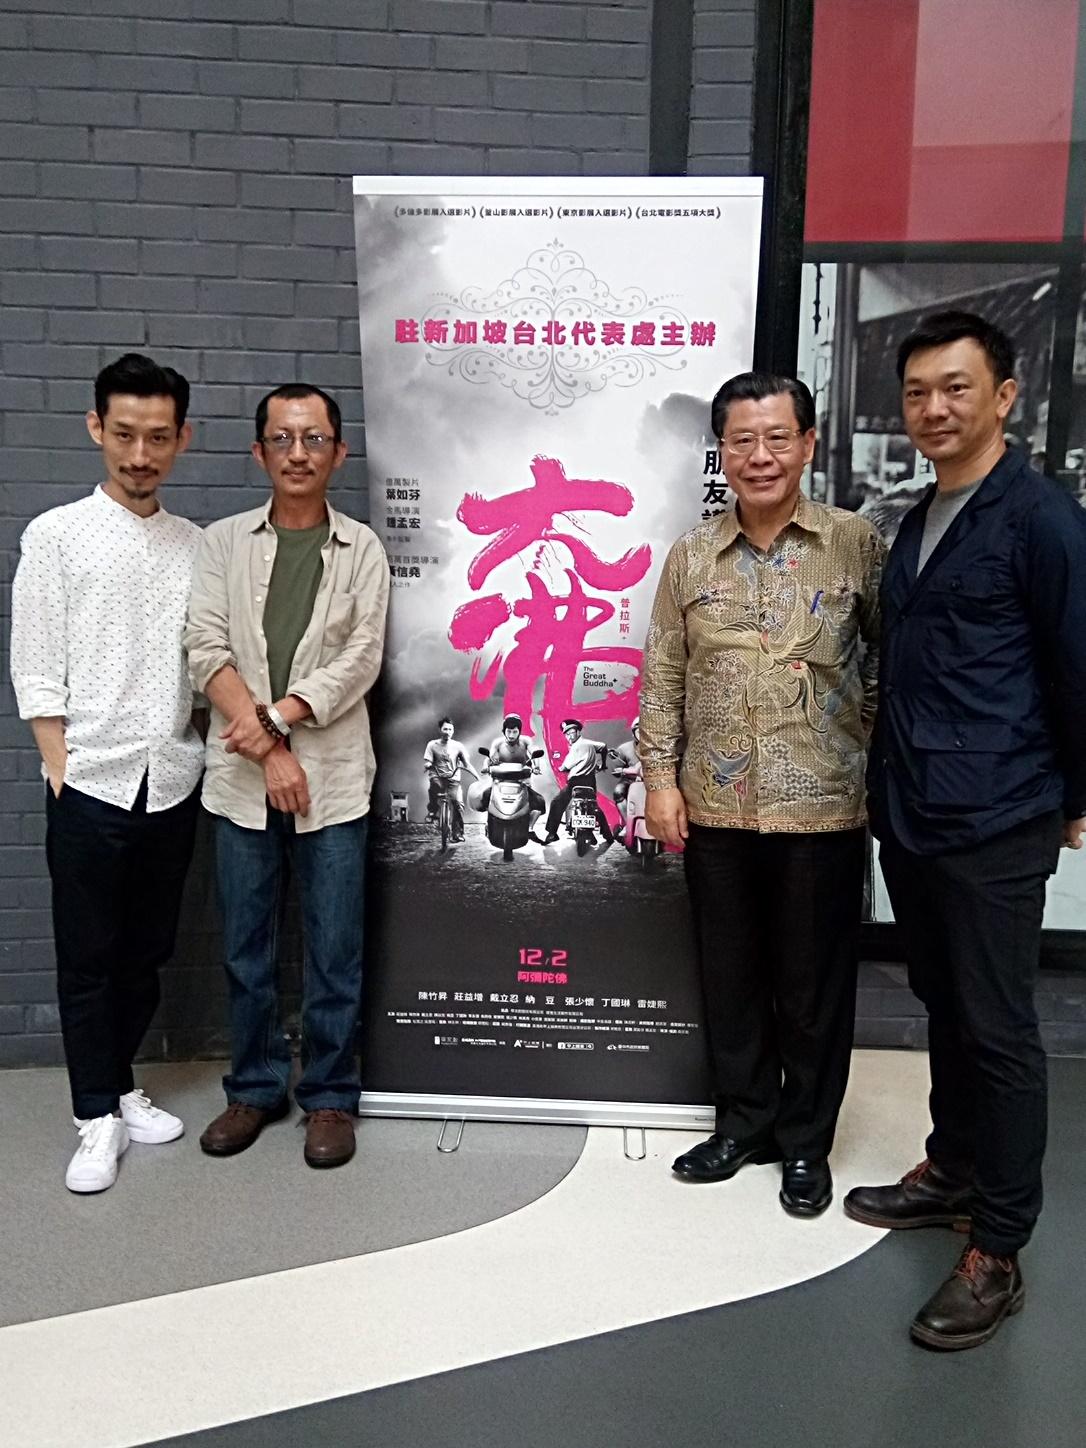 Representative Francis Liang (second from right) with Director Huang Hsin-yao (extreme right) and the two male leads, Cres Chuang and Bamboo Chen (second from left and extreme left, respectively), at the special screening of “The Great Buddha +”.